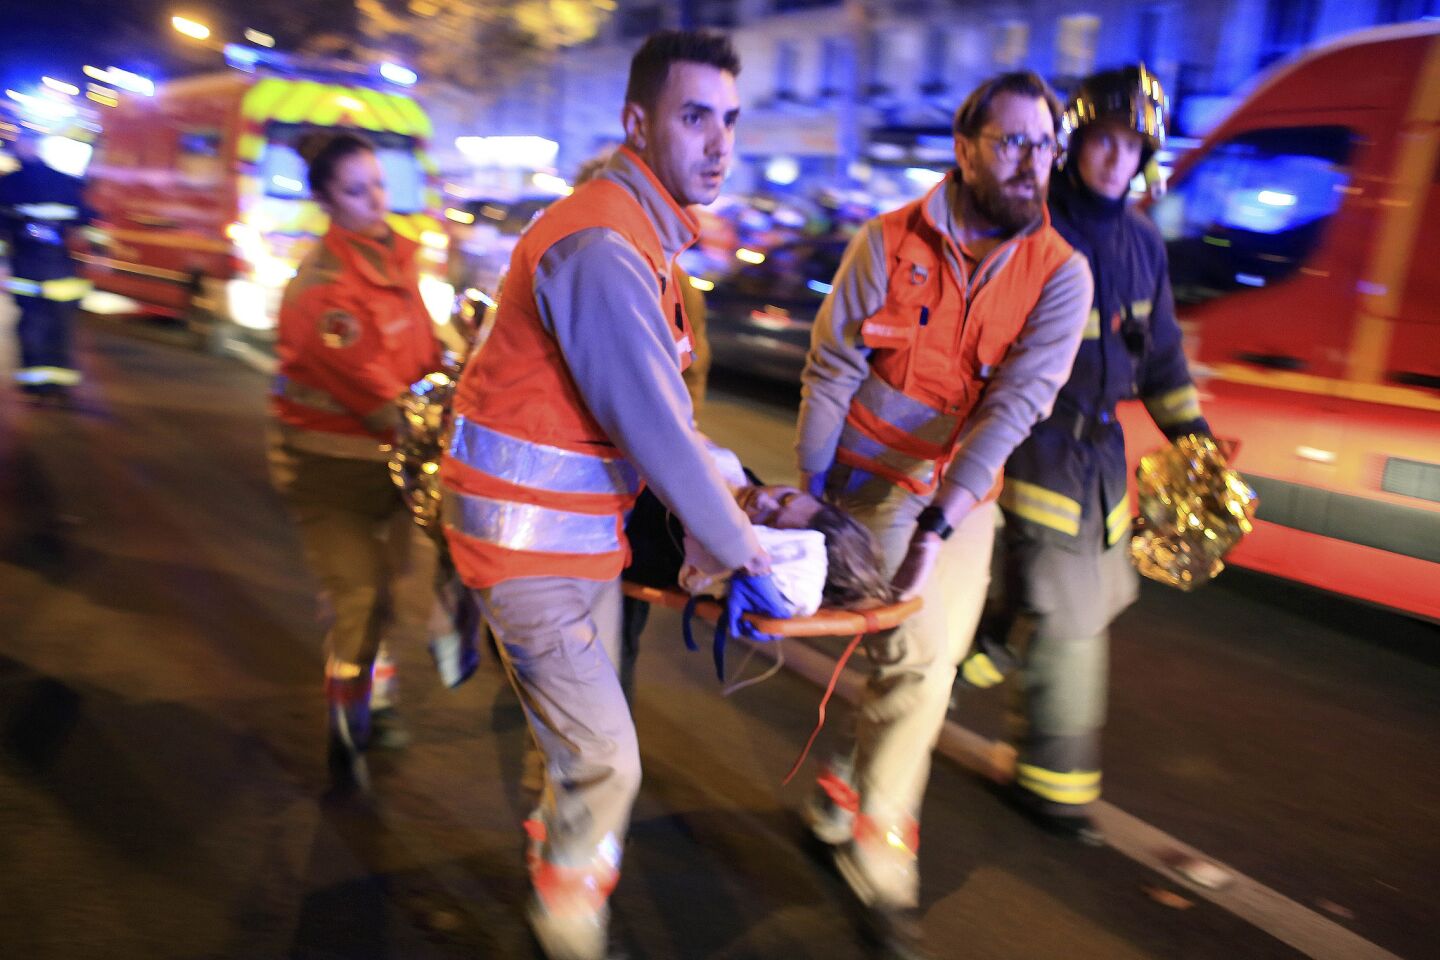 A woman is evacuated from the Bataclan theater after the shootings in Paris.